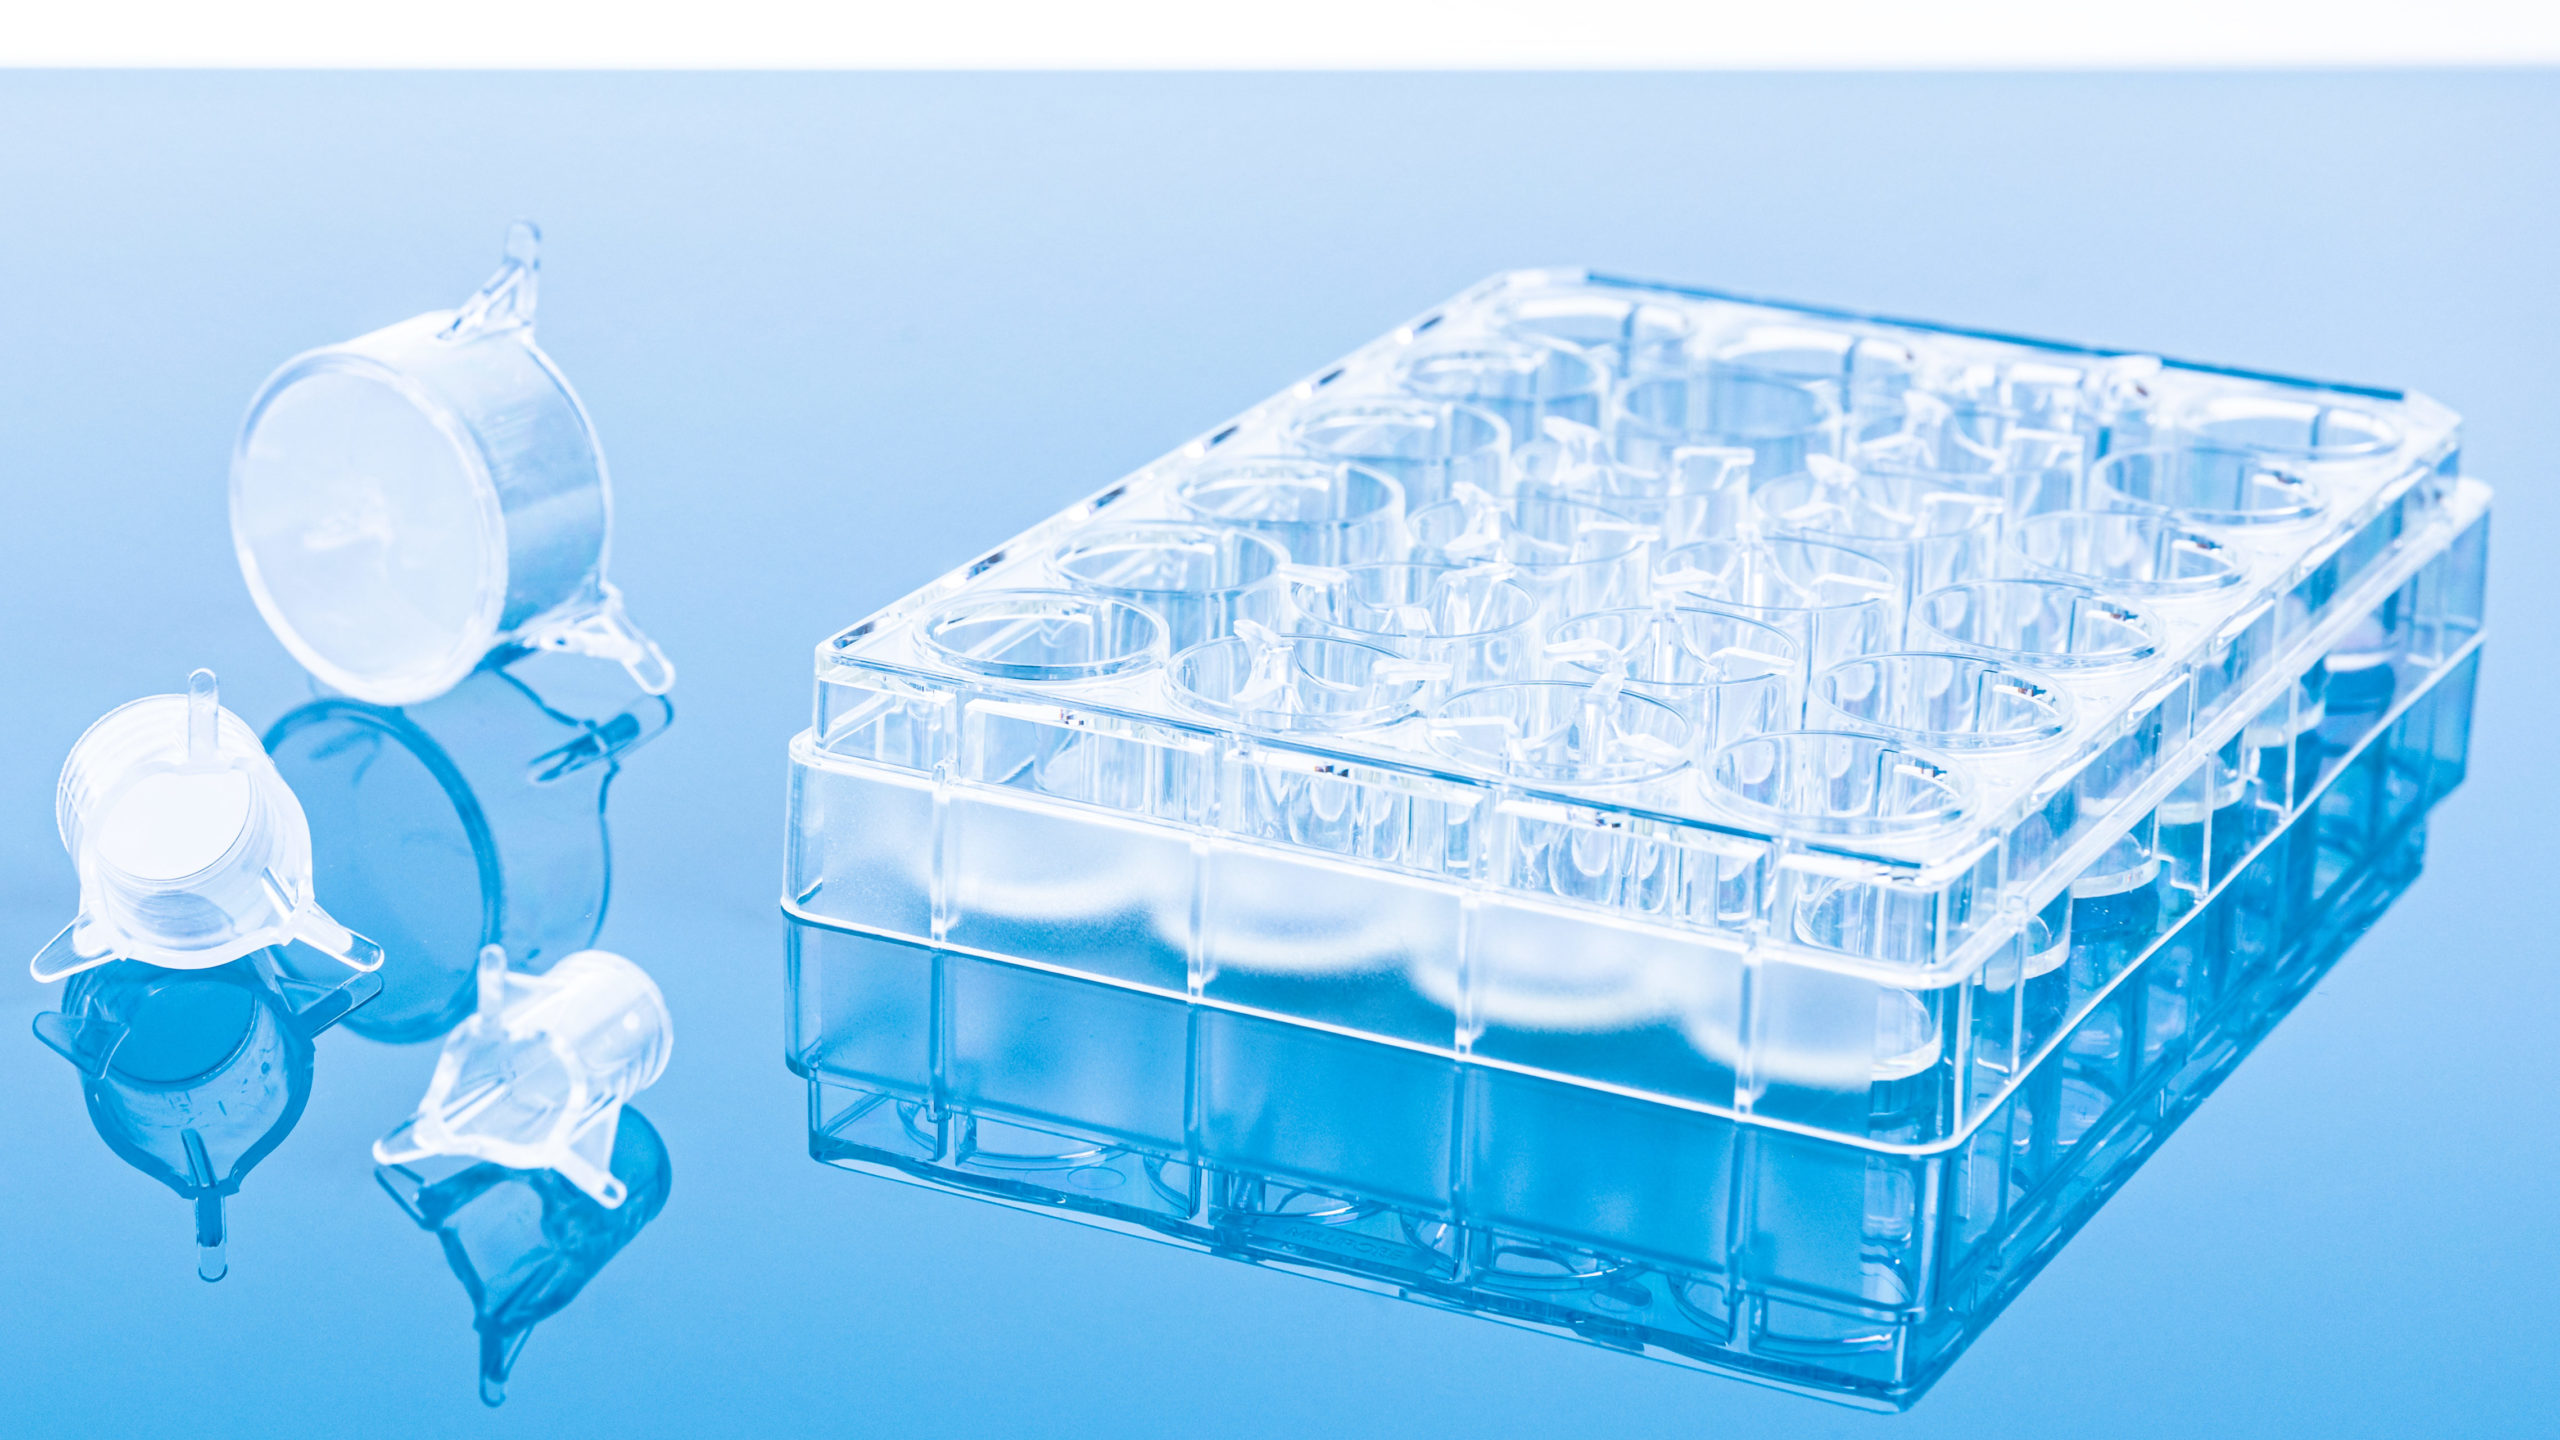 cell culture inserts manufactured with a  Unique-Mem track-etched membranes and bonded directly to the insert